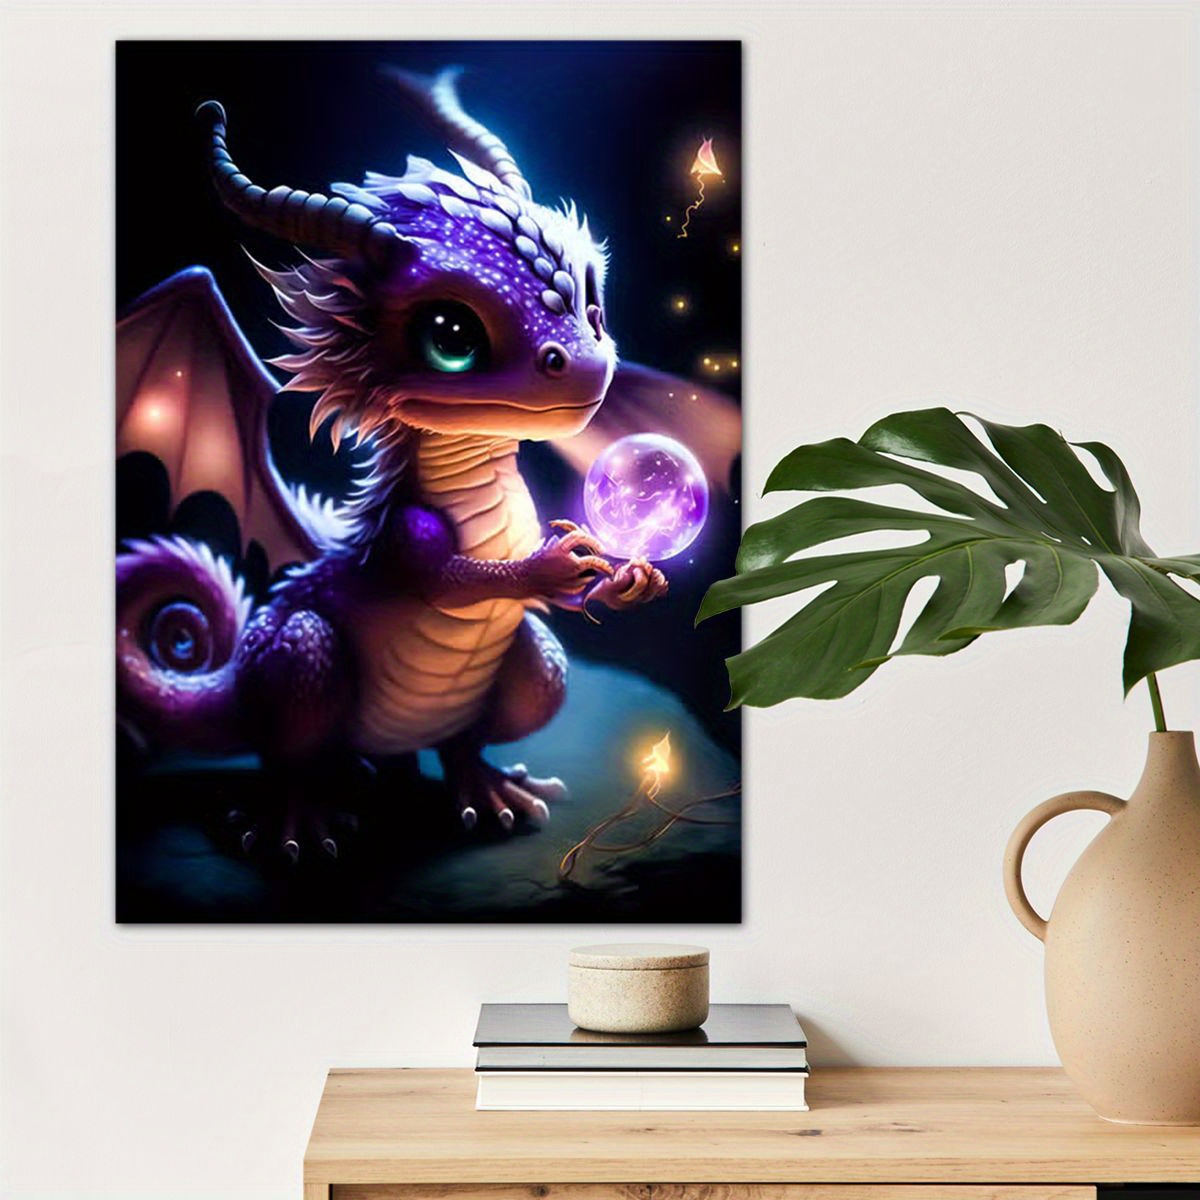 

1pc Purple Dragon Poster Canvas Wall Art For Home Decor, Animal Lovers Poster Wall Decor High Quality Canvas Prints For Living Room Bedroom Kitchen Office Cafe Decor, Perfect Gift And Decoration